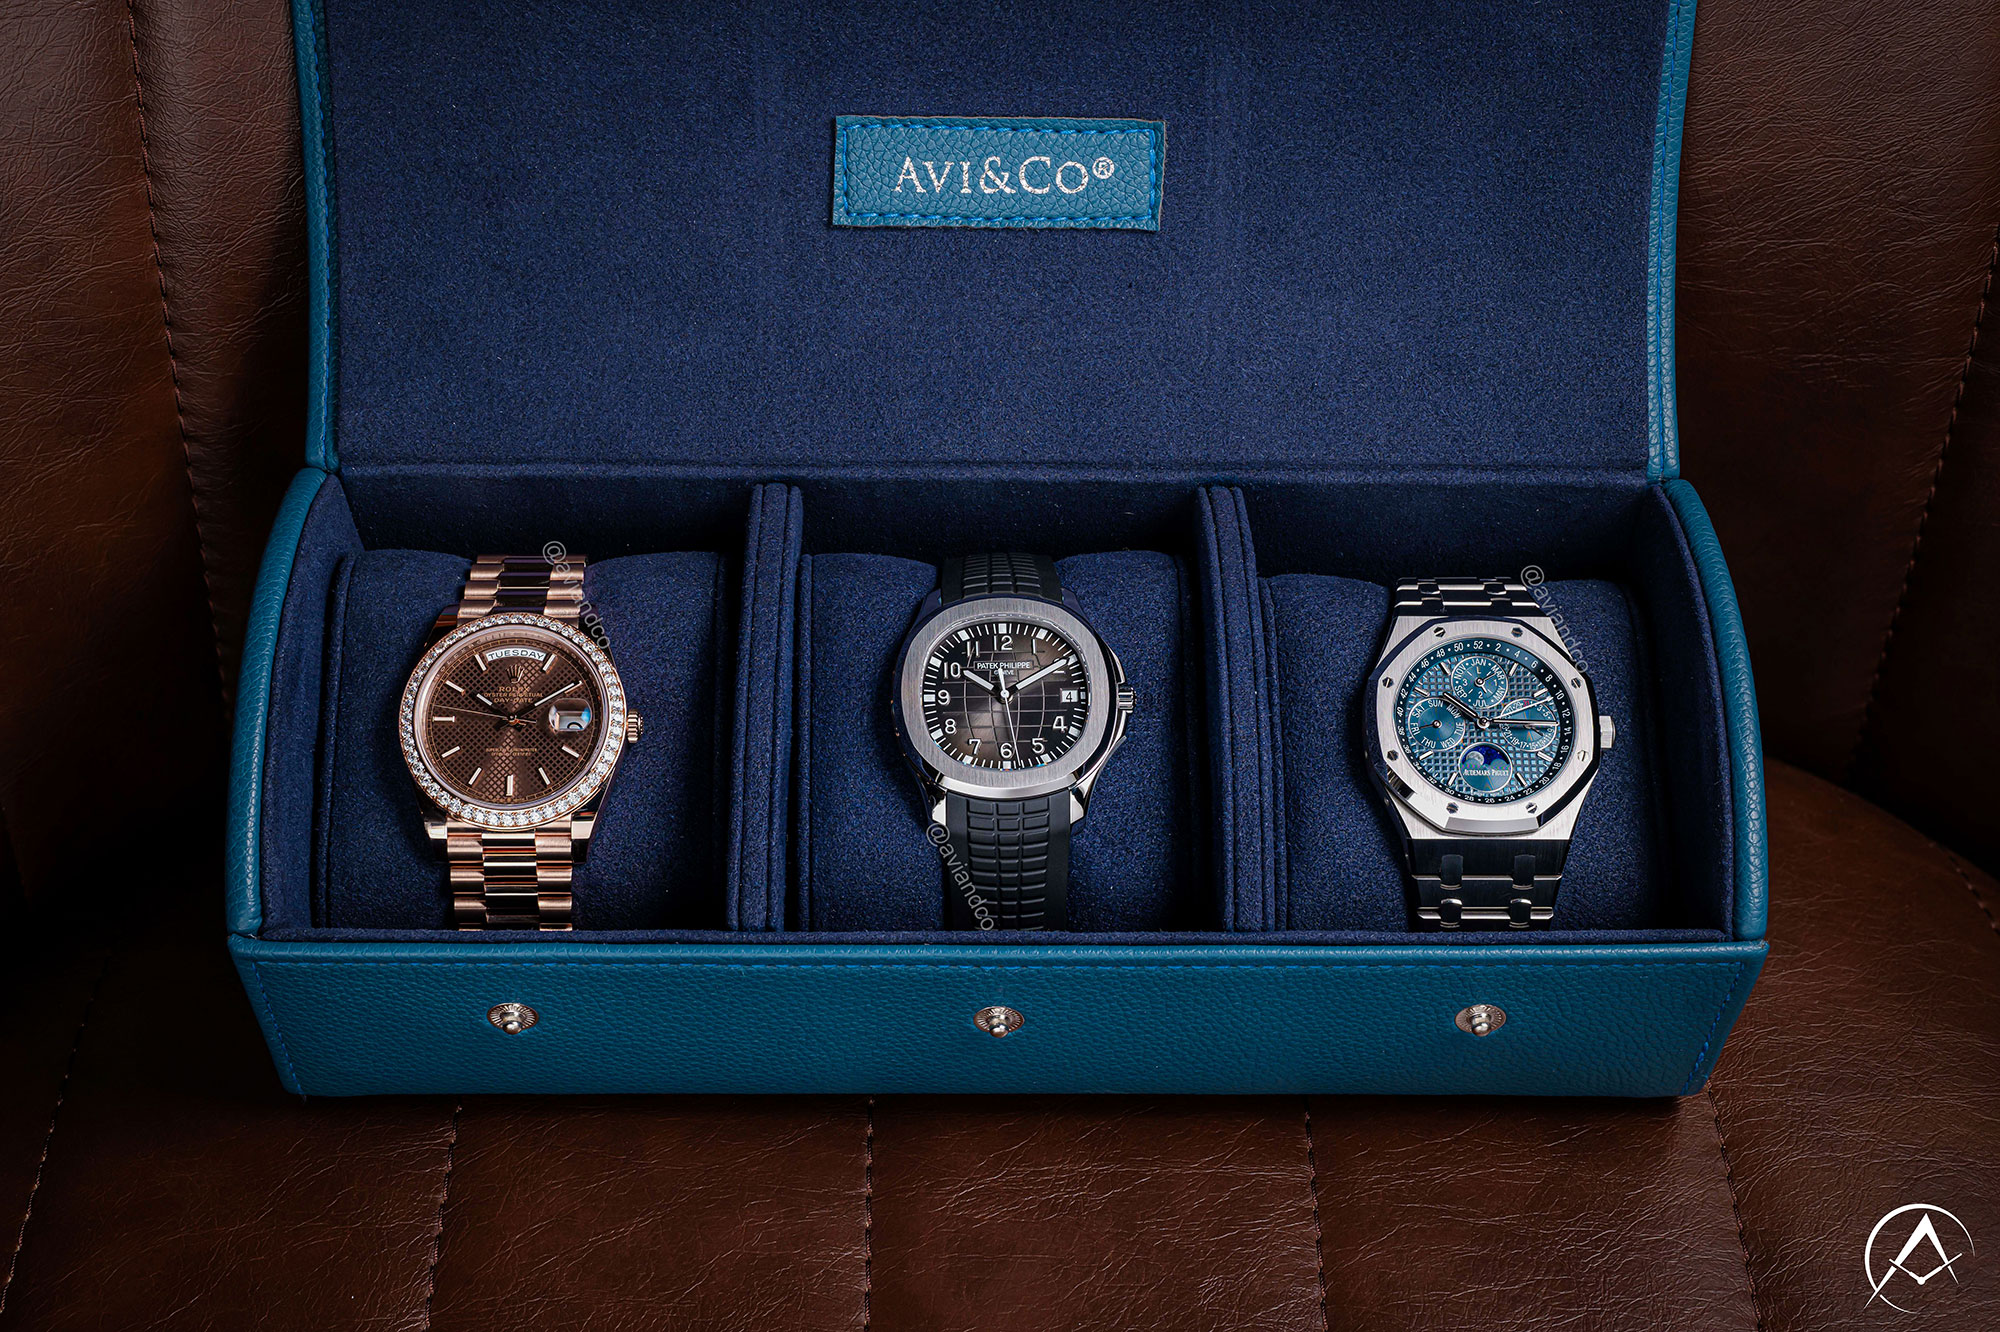 Three Luxury Watches Displayed in Navy Avi & Co. Watch Roll. From Left to Right: 18K Rose Gold Chocolate Diamond Bezel, Stainless Steel Black Arabic Dial, and Stainless Steel Blue Dial Chronograph, all with Medium Case Diameters.